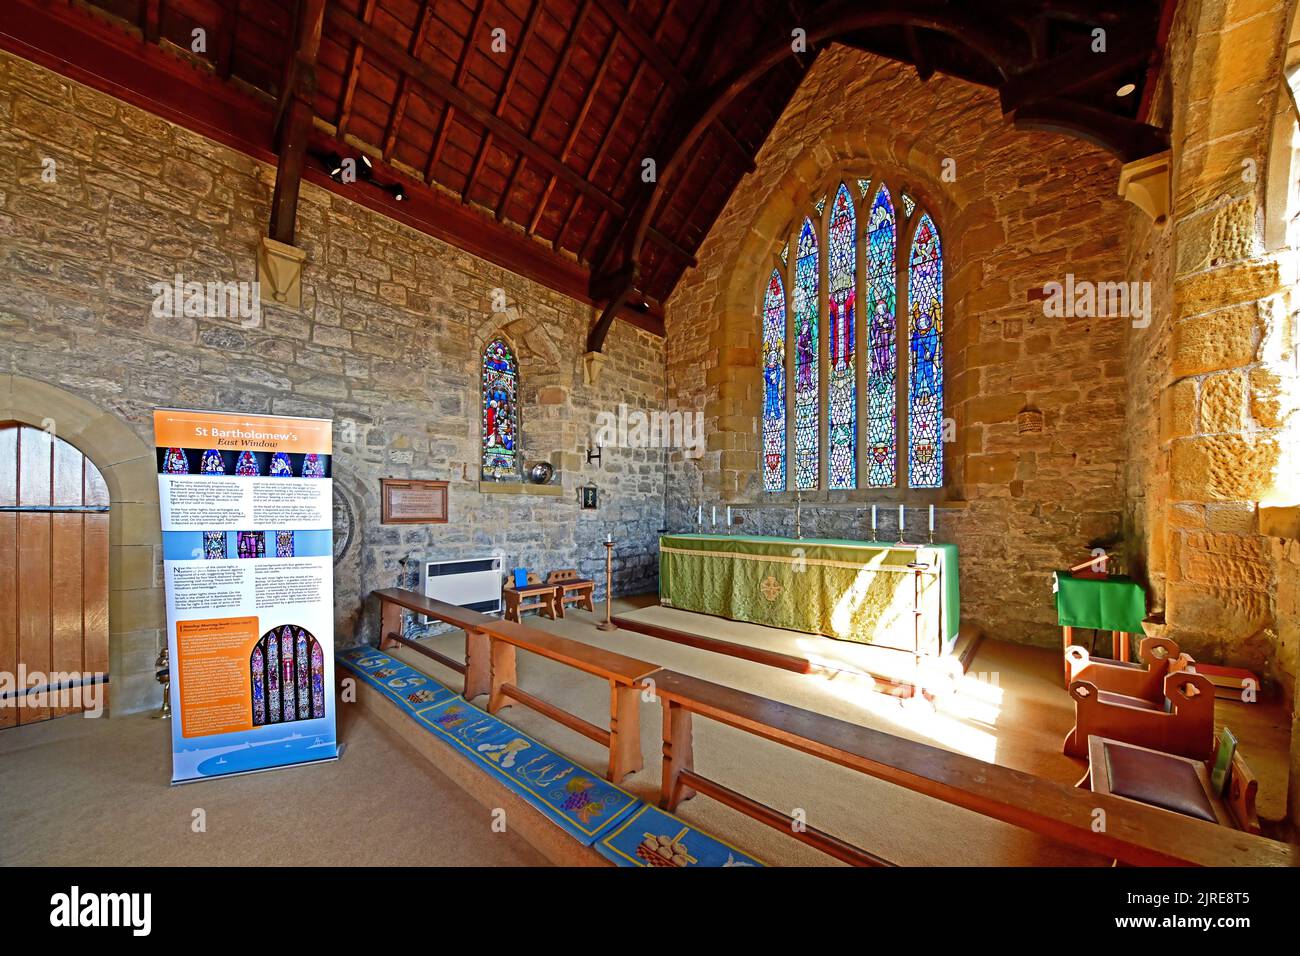 Newbiggin by the sea Northumberland beautiful seaside village with 13th century St Batholomews church interior view looking east towards the superb 14 Stock Photo